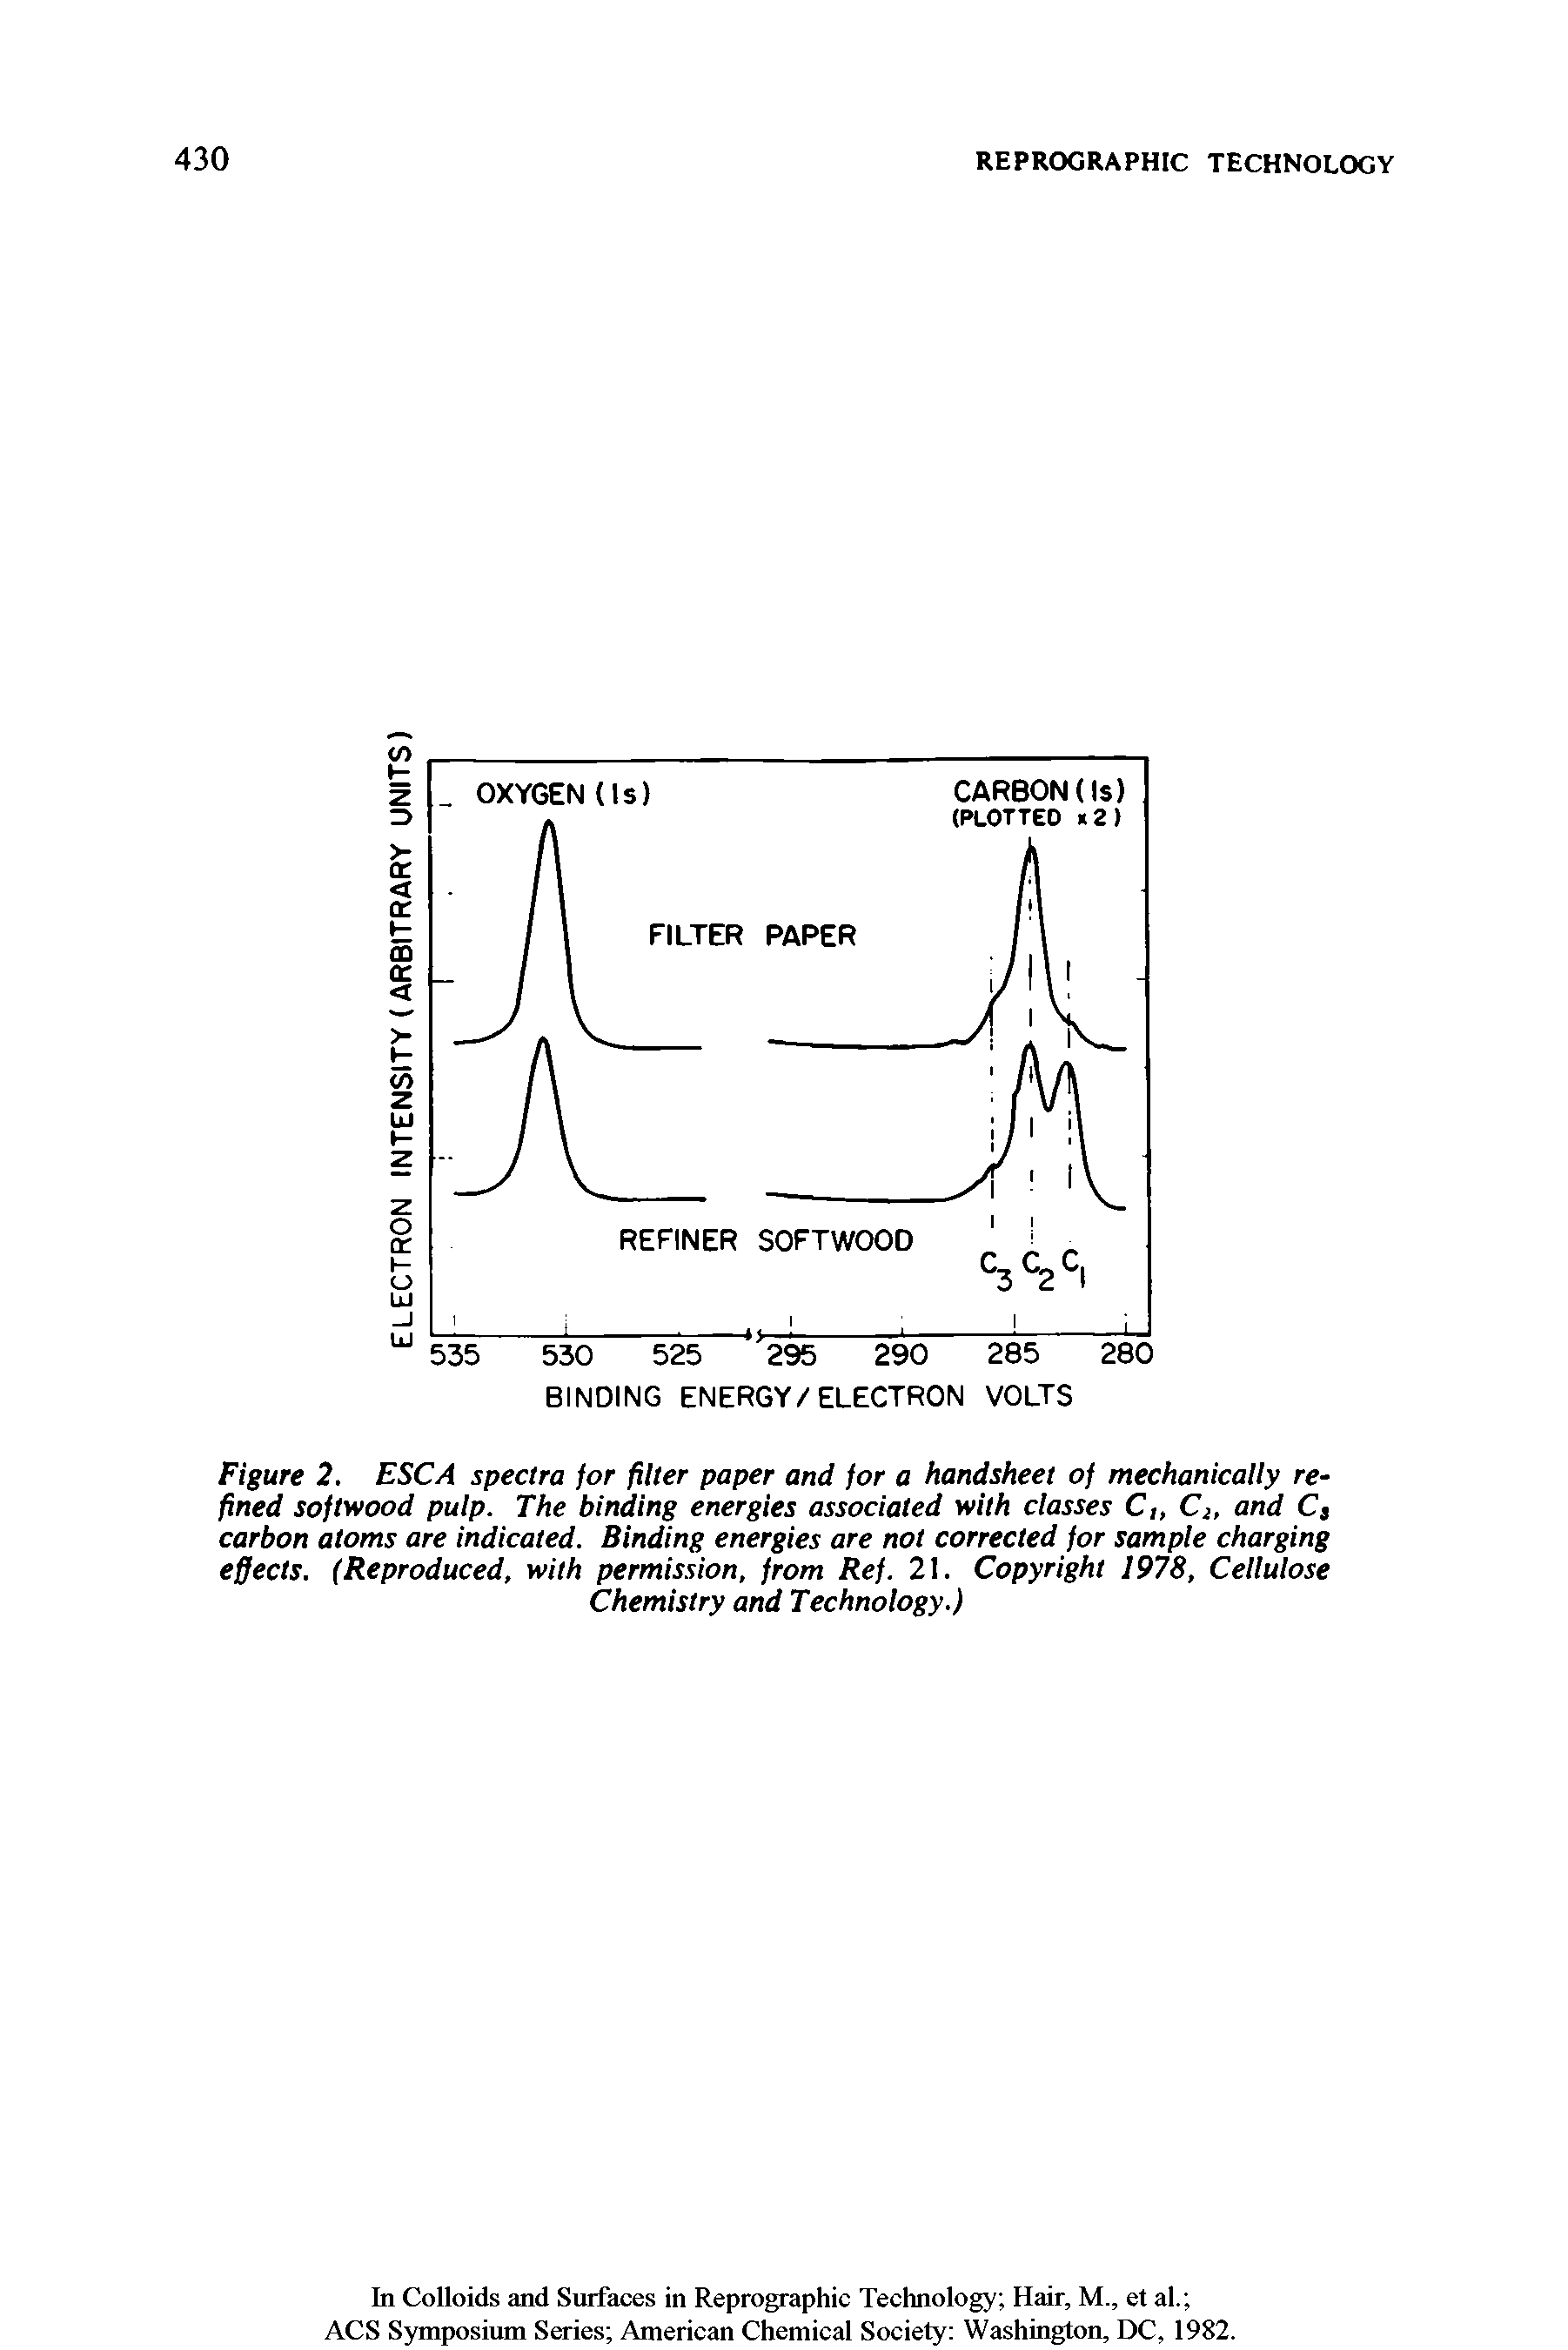 Figure 2. ESCA spectra for filter paper and for a handsheet of mechanically refined softwood pulp. The binding energies associated with classes C, Clt and Cs carbon atoms are indicated. Binding energies are not corrected for sample charging effects. (Reproduced, with permission, from Ref. 21. Copyright 1978, Cellulose Chemistry and Technology.)...